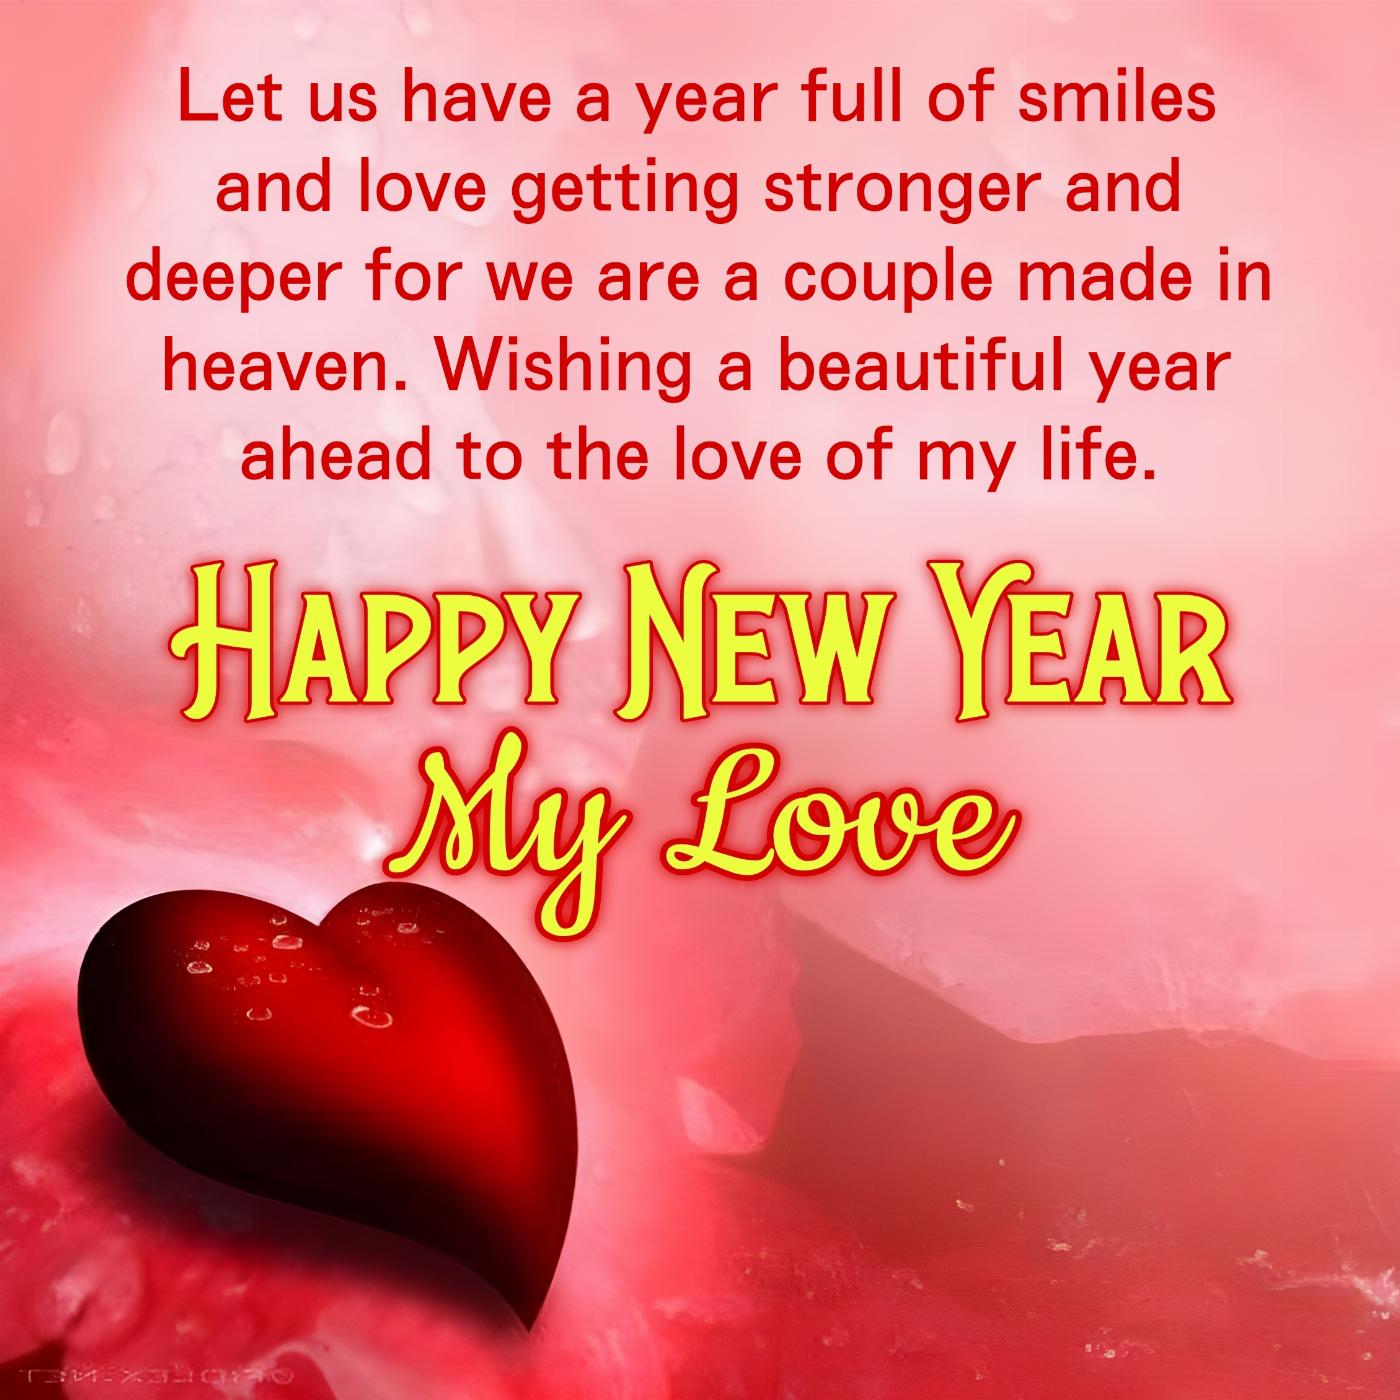 Let us have a year full of smiles and love getting stronger